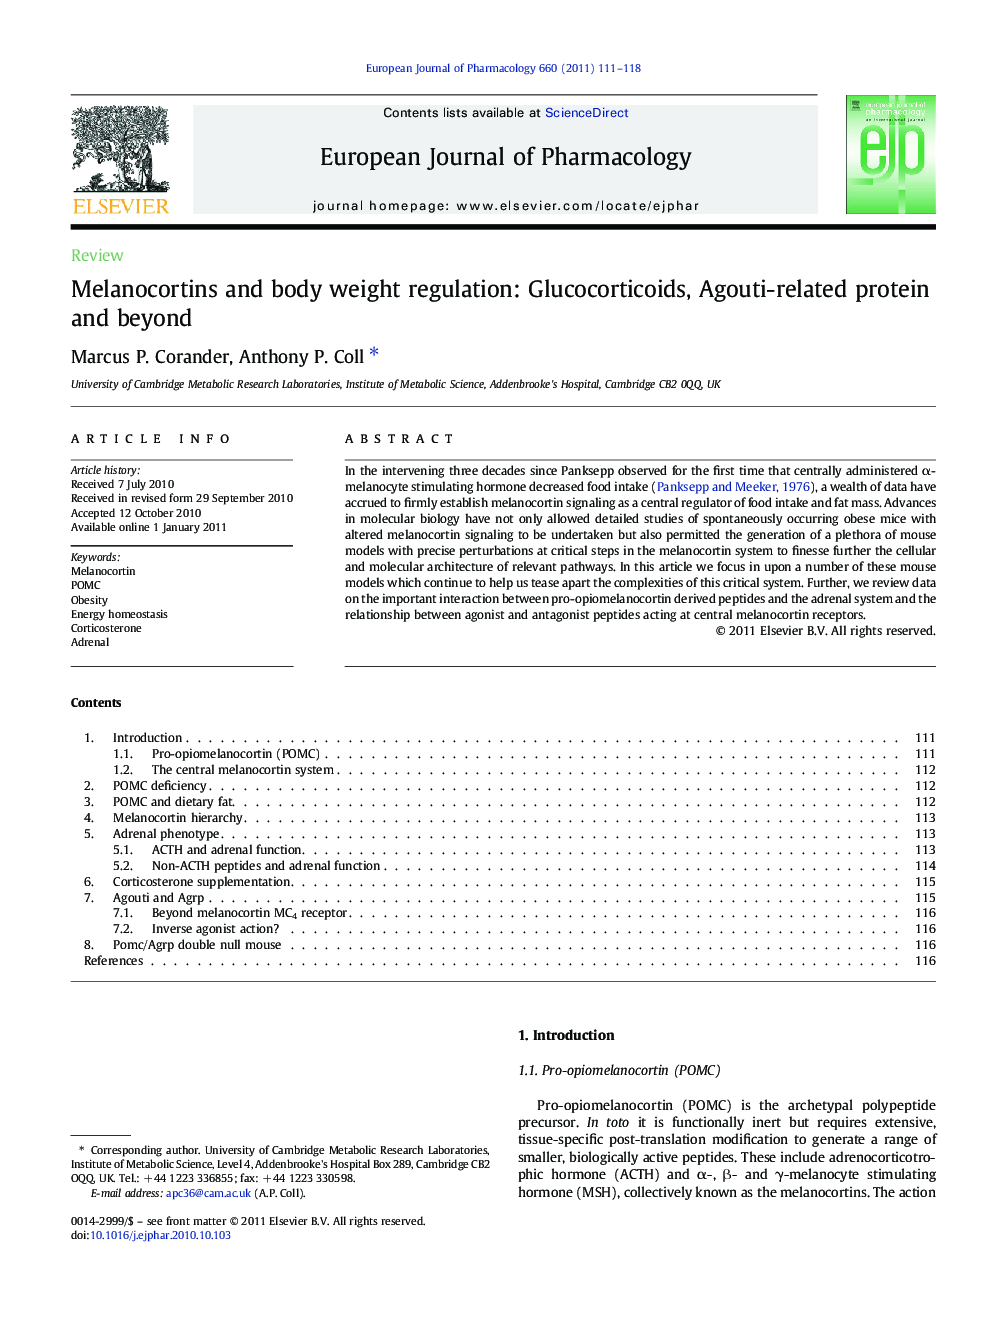 Melanocortins and body weight regulation: Glucocorticoids, Agouti-related protein and beyond